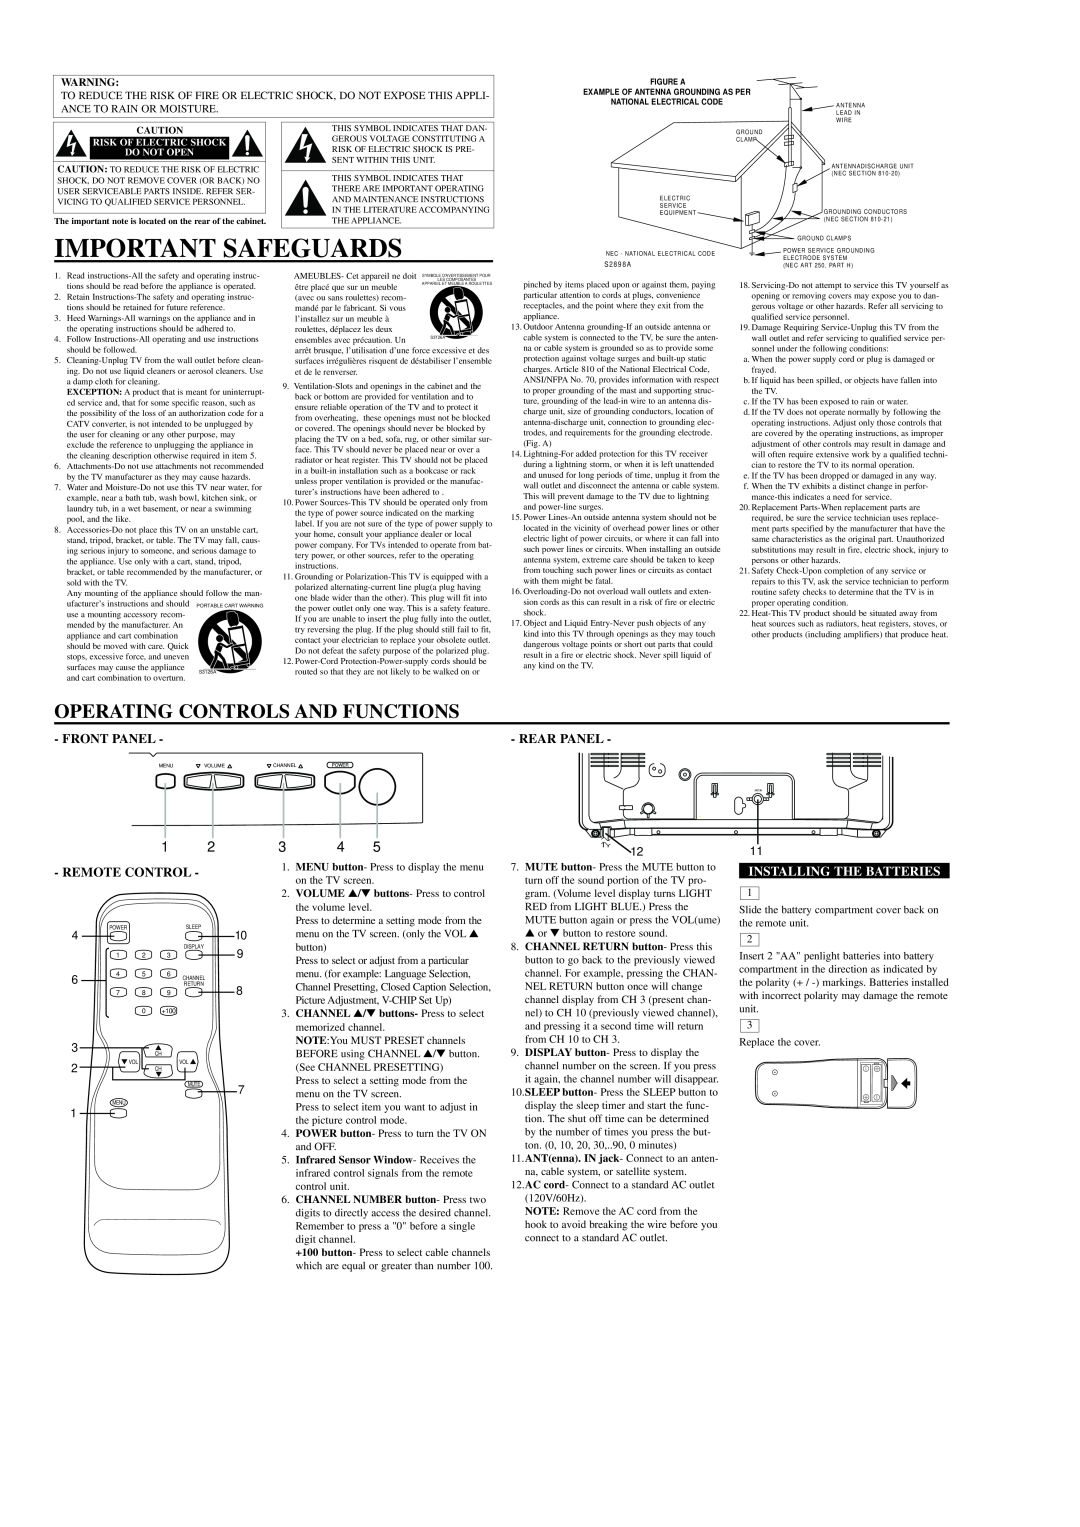 Emerson EWT1931 Important Safeguards, Operating Controls And Functions, Front Panel, Rear Panel, Remote Control 